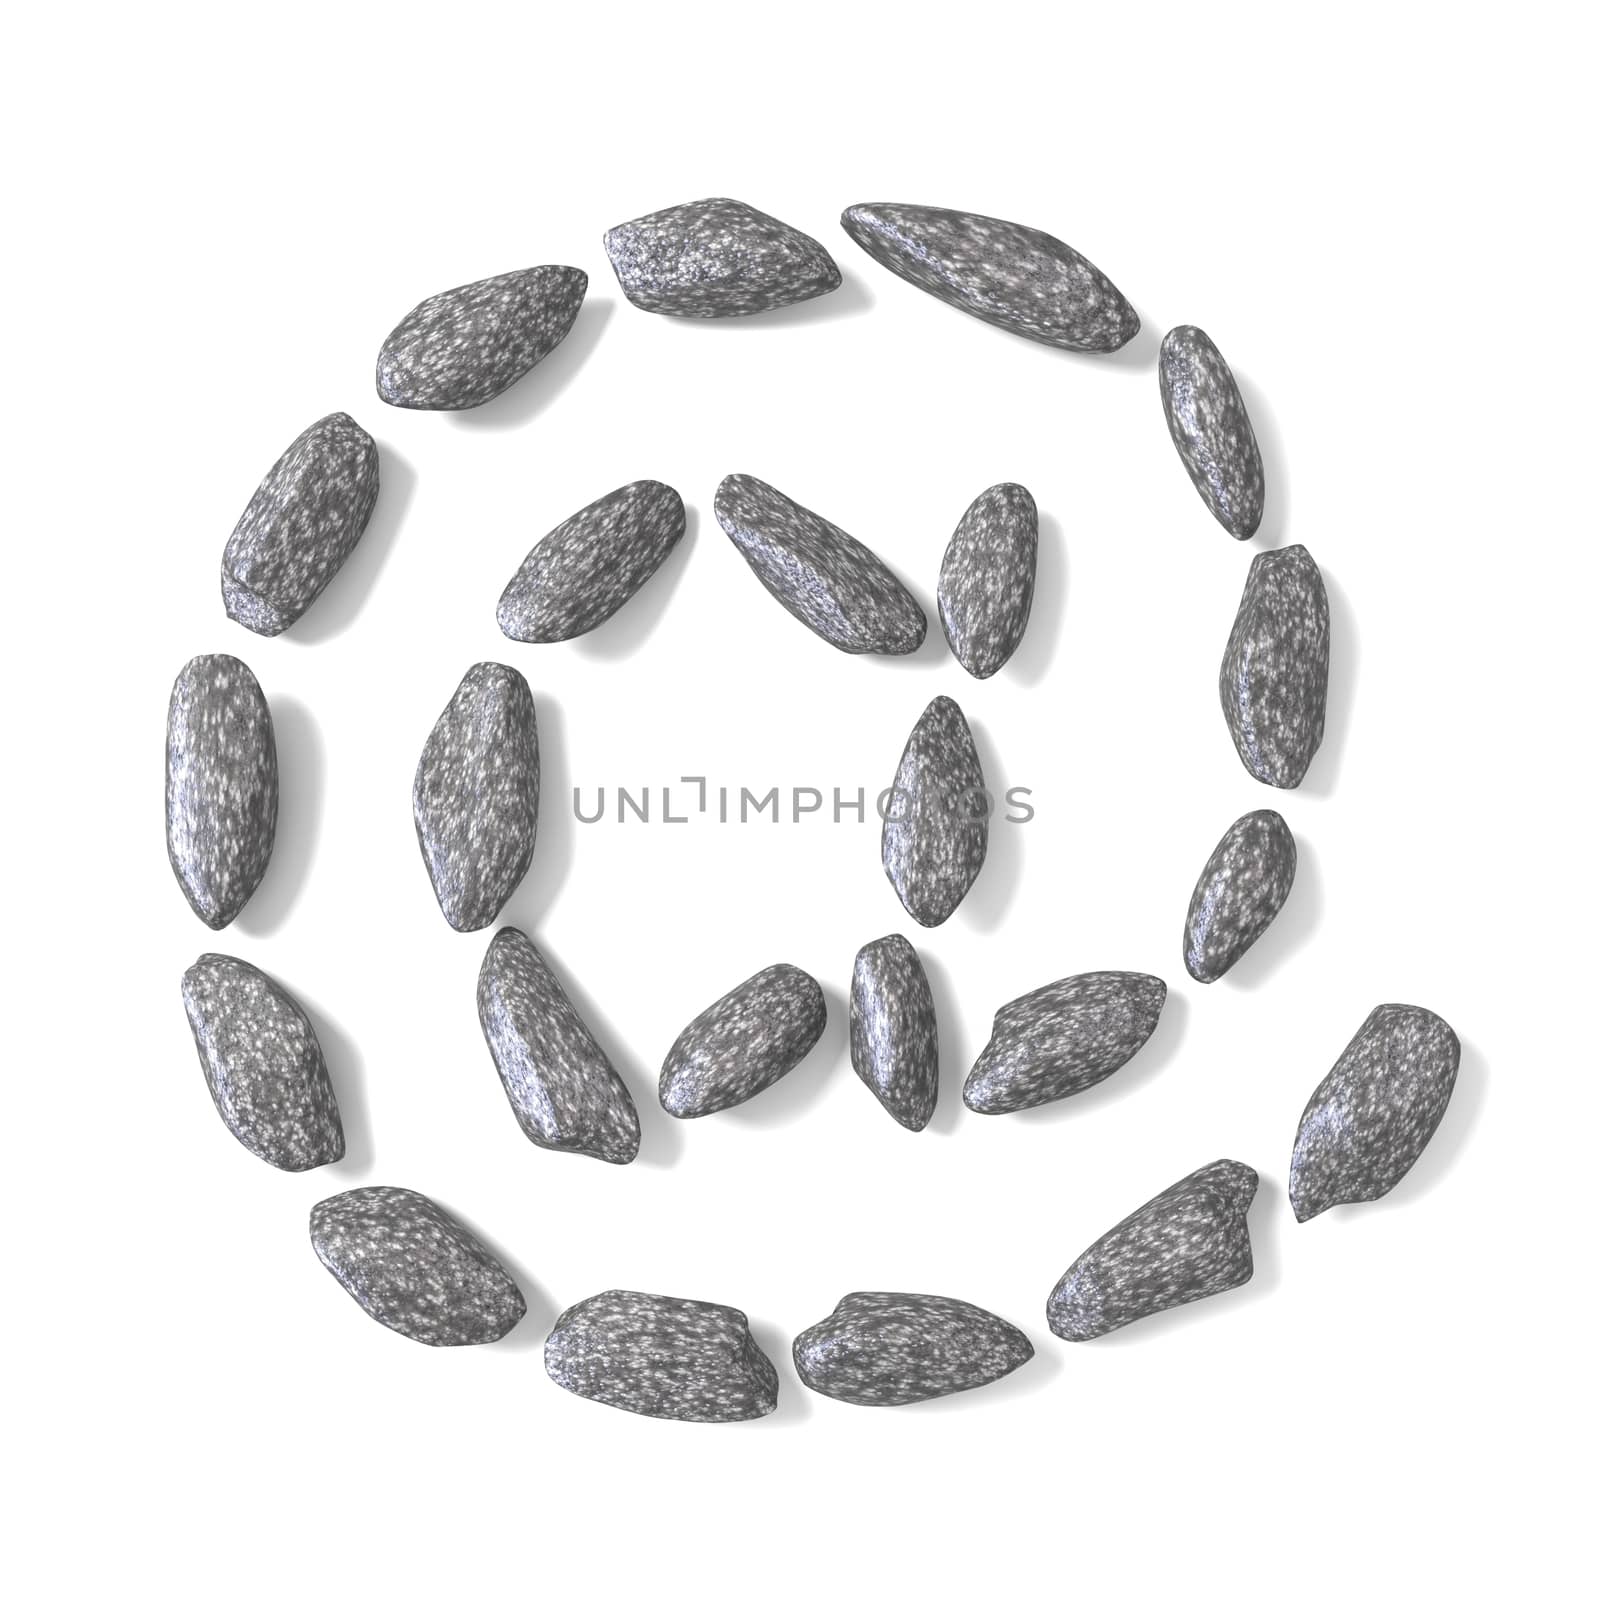 At sign made of rocks 3D render illustration isolated on white background